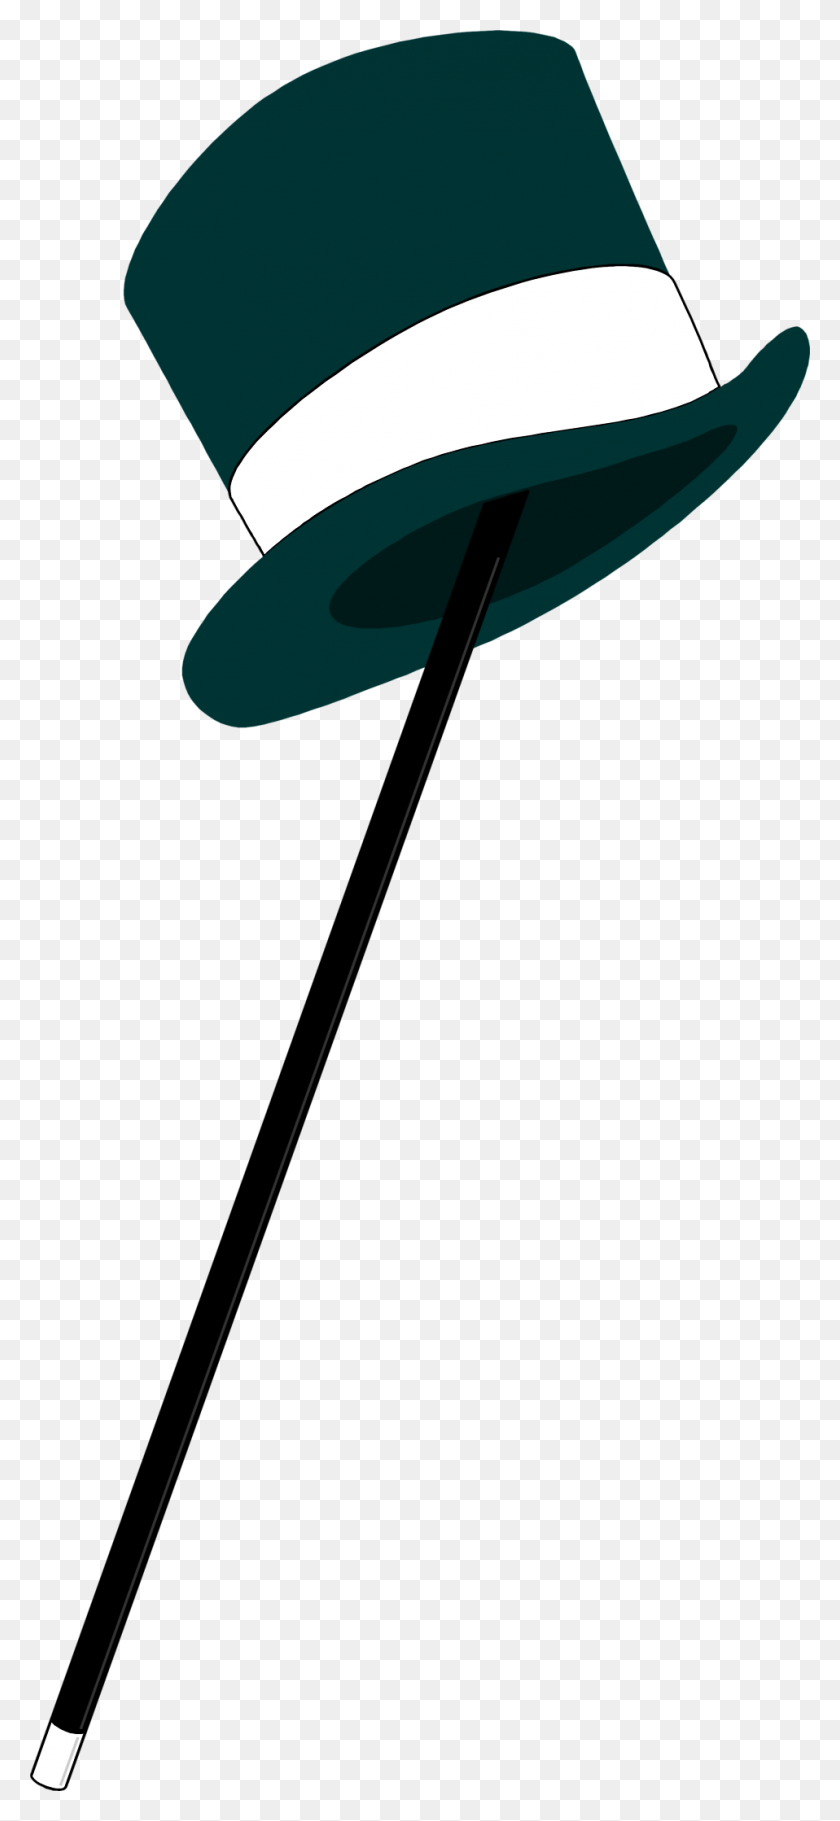 958x2164 Top Hat Free Stock Photo Illustration Of A Top Hat And Cane Clip - Free Stock Clipart